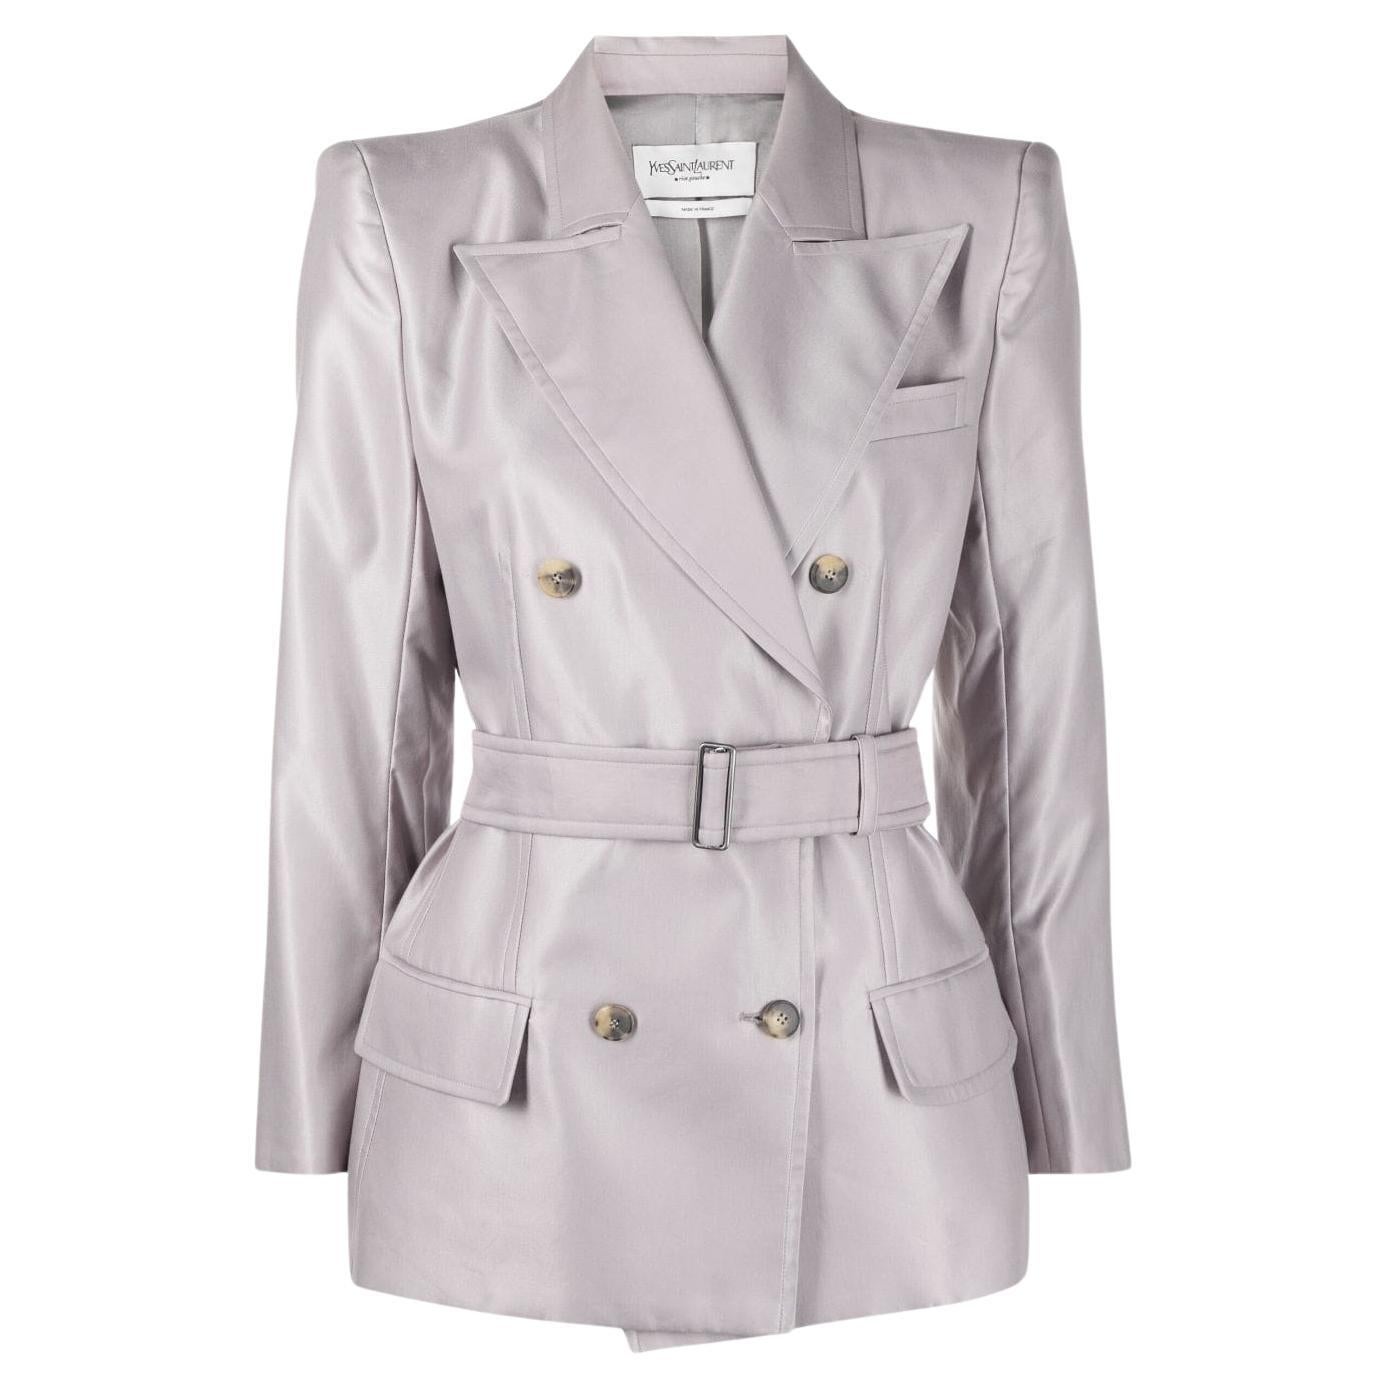 Yves Saint Laurent by Tom Ford Satin Lilac Blazer For Sale